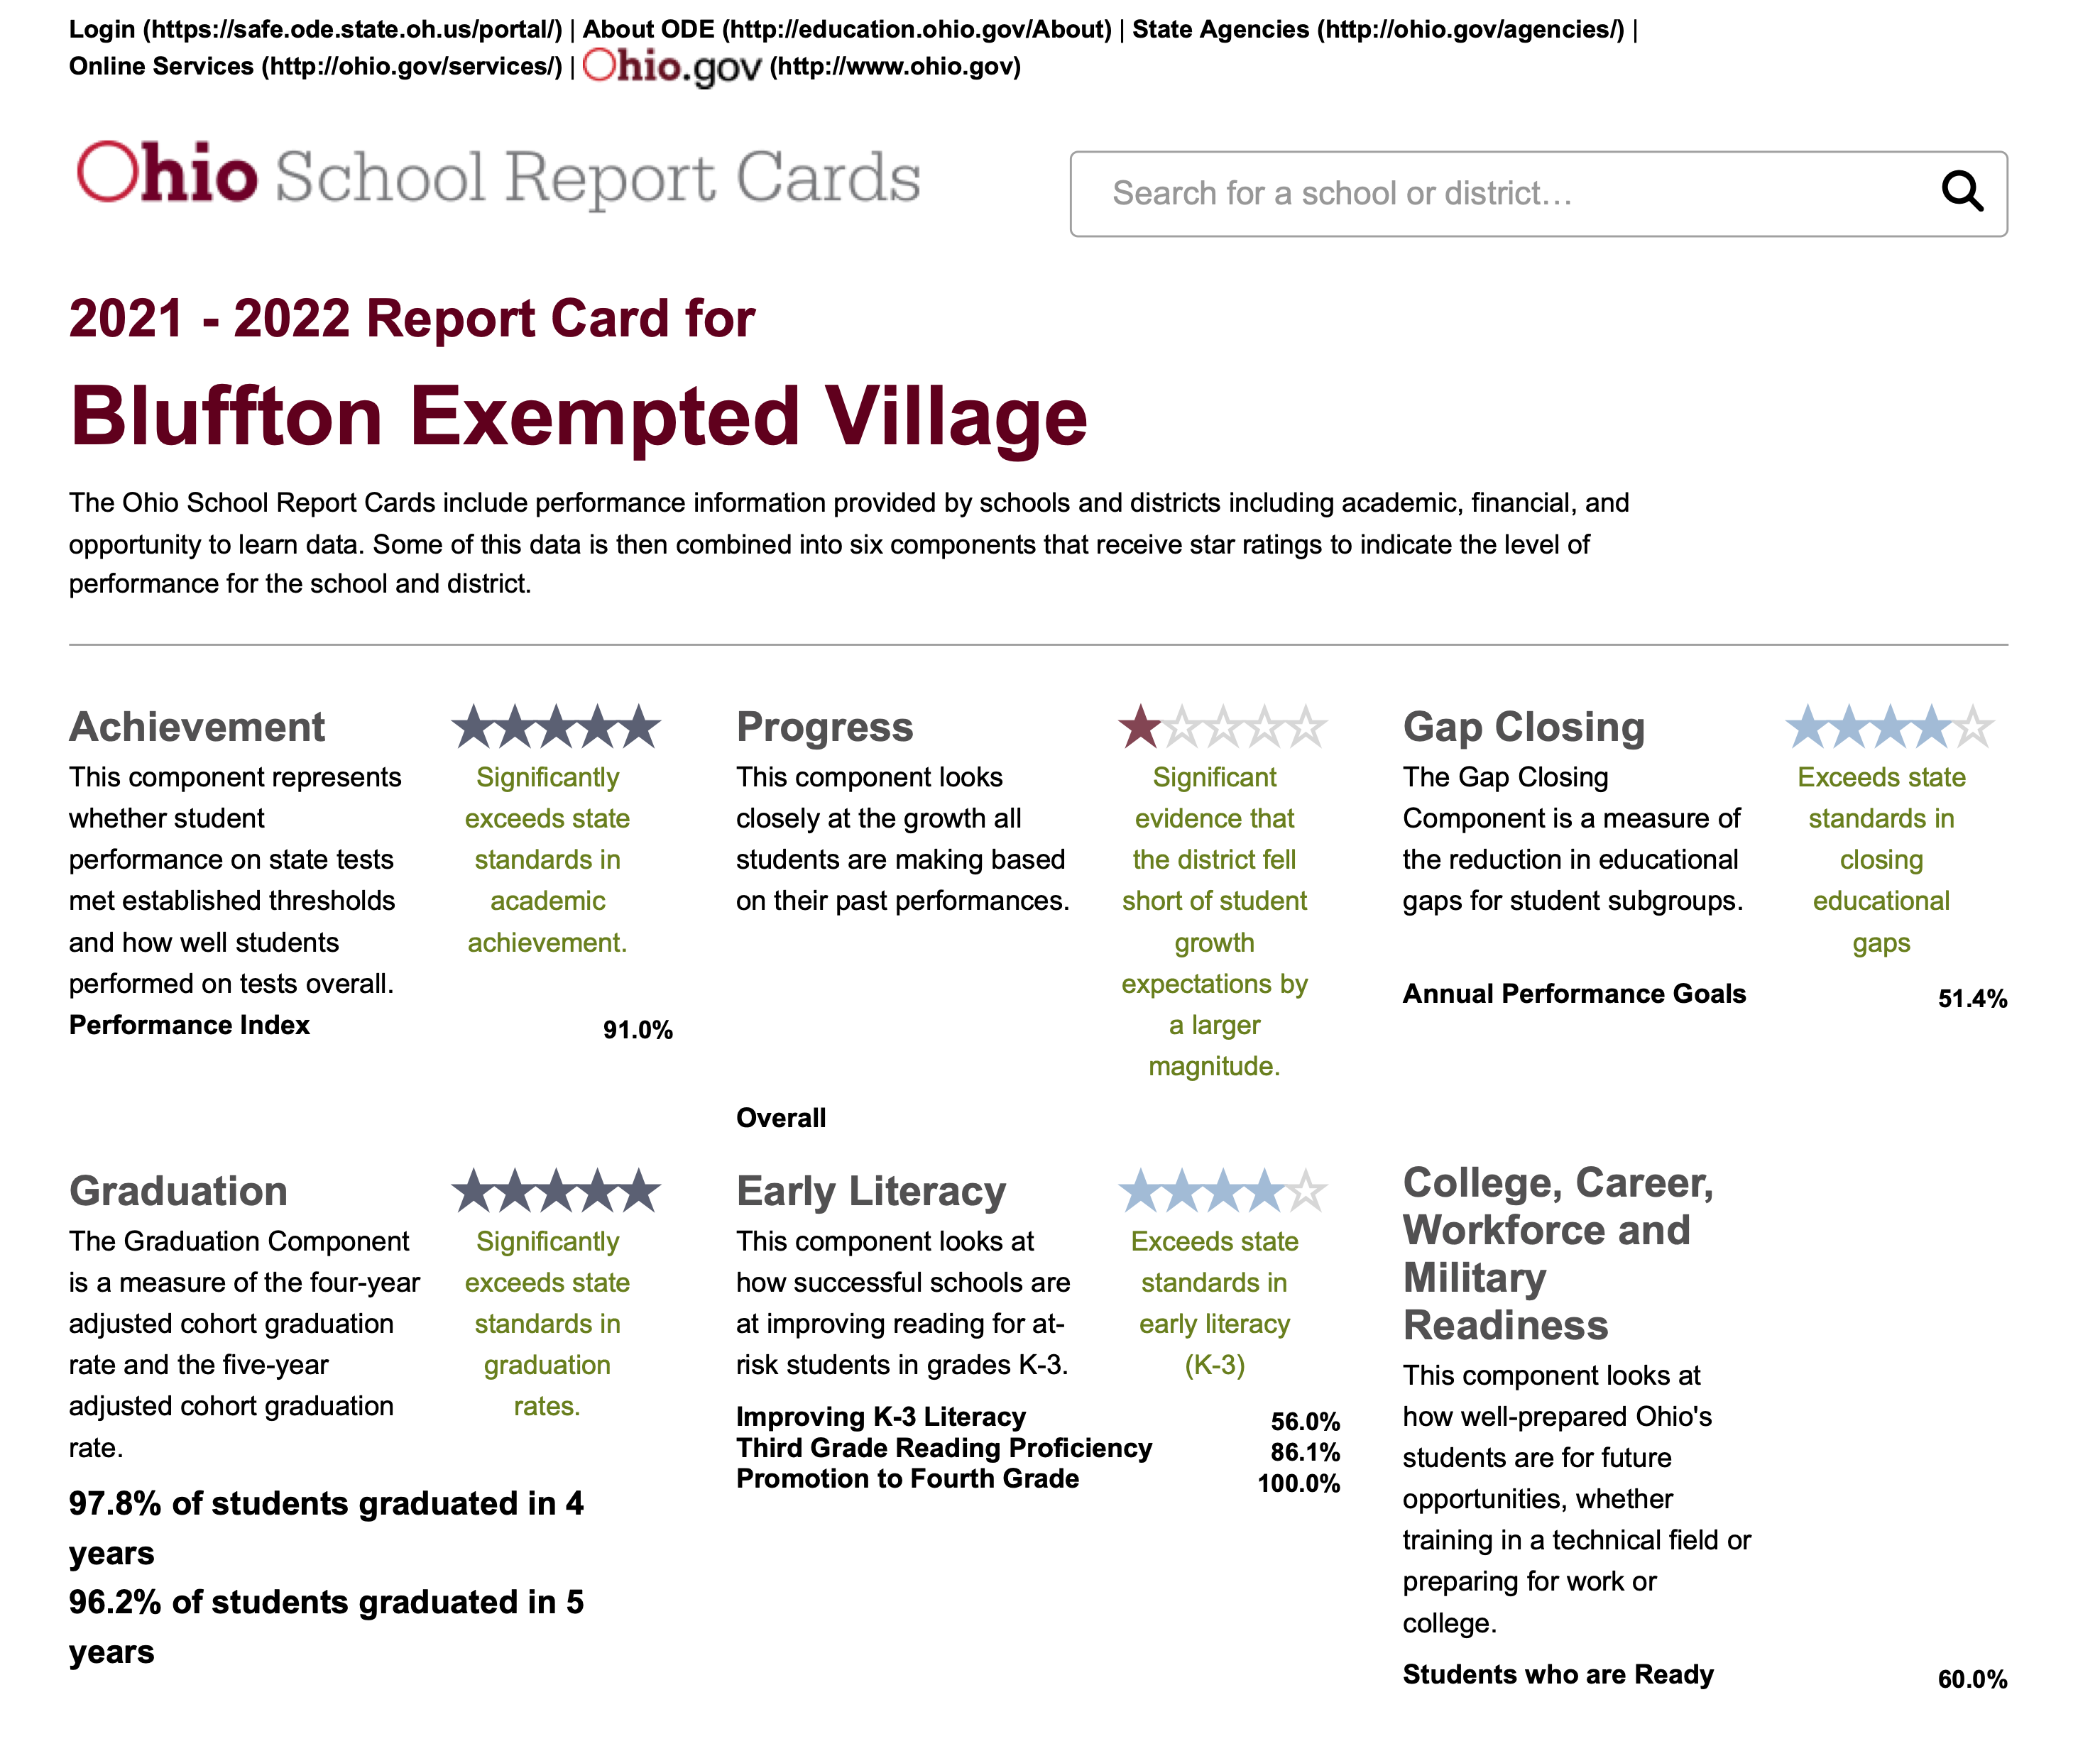 Bluffton Schools report card from the State of Ohio, 20212022